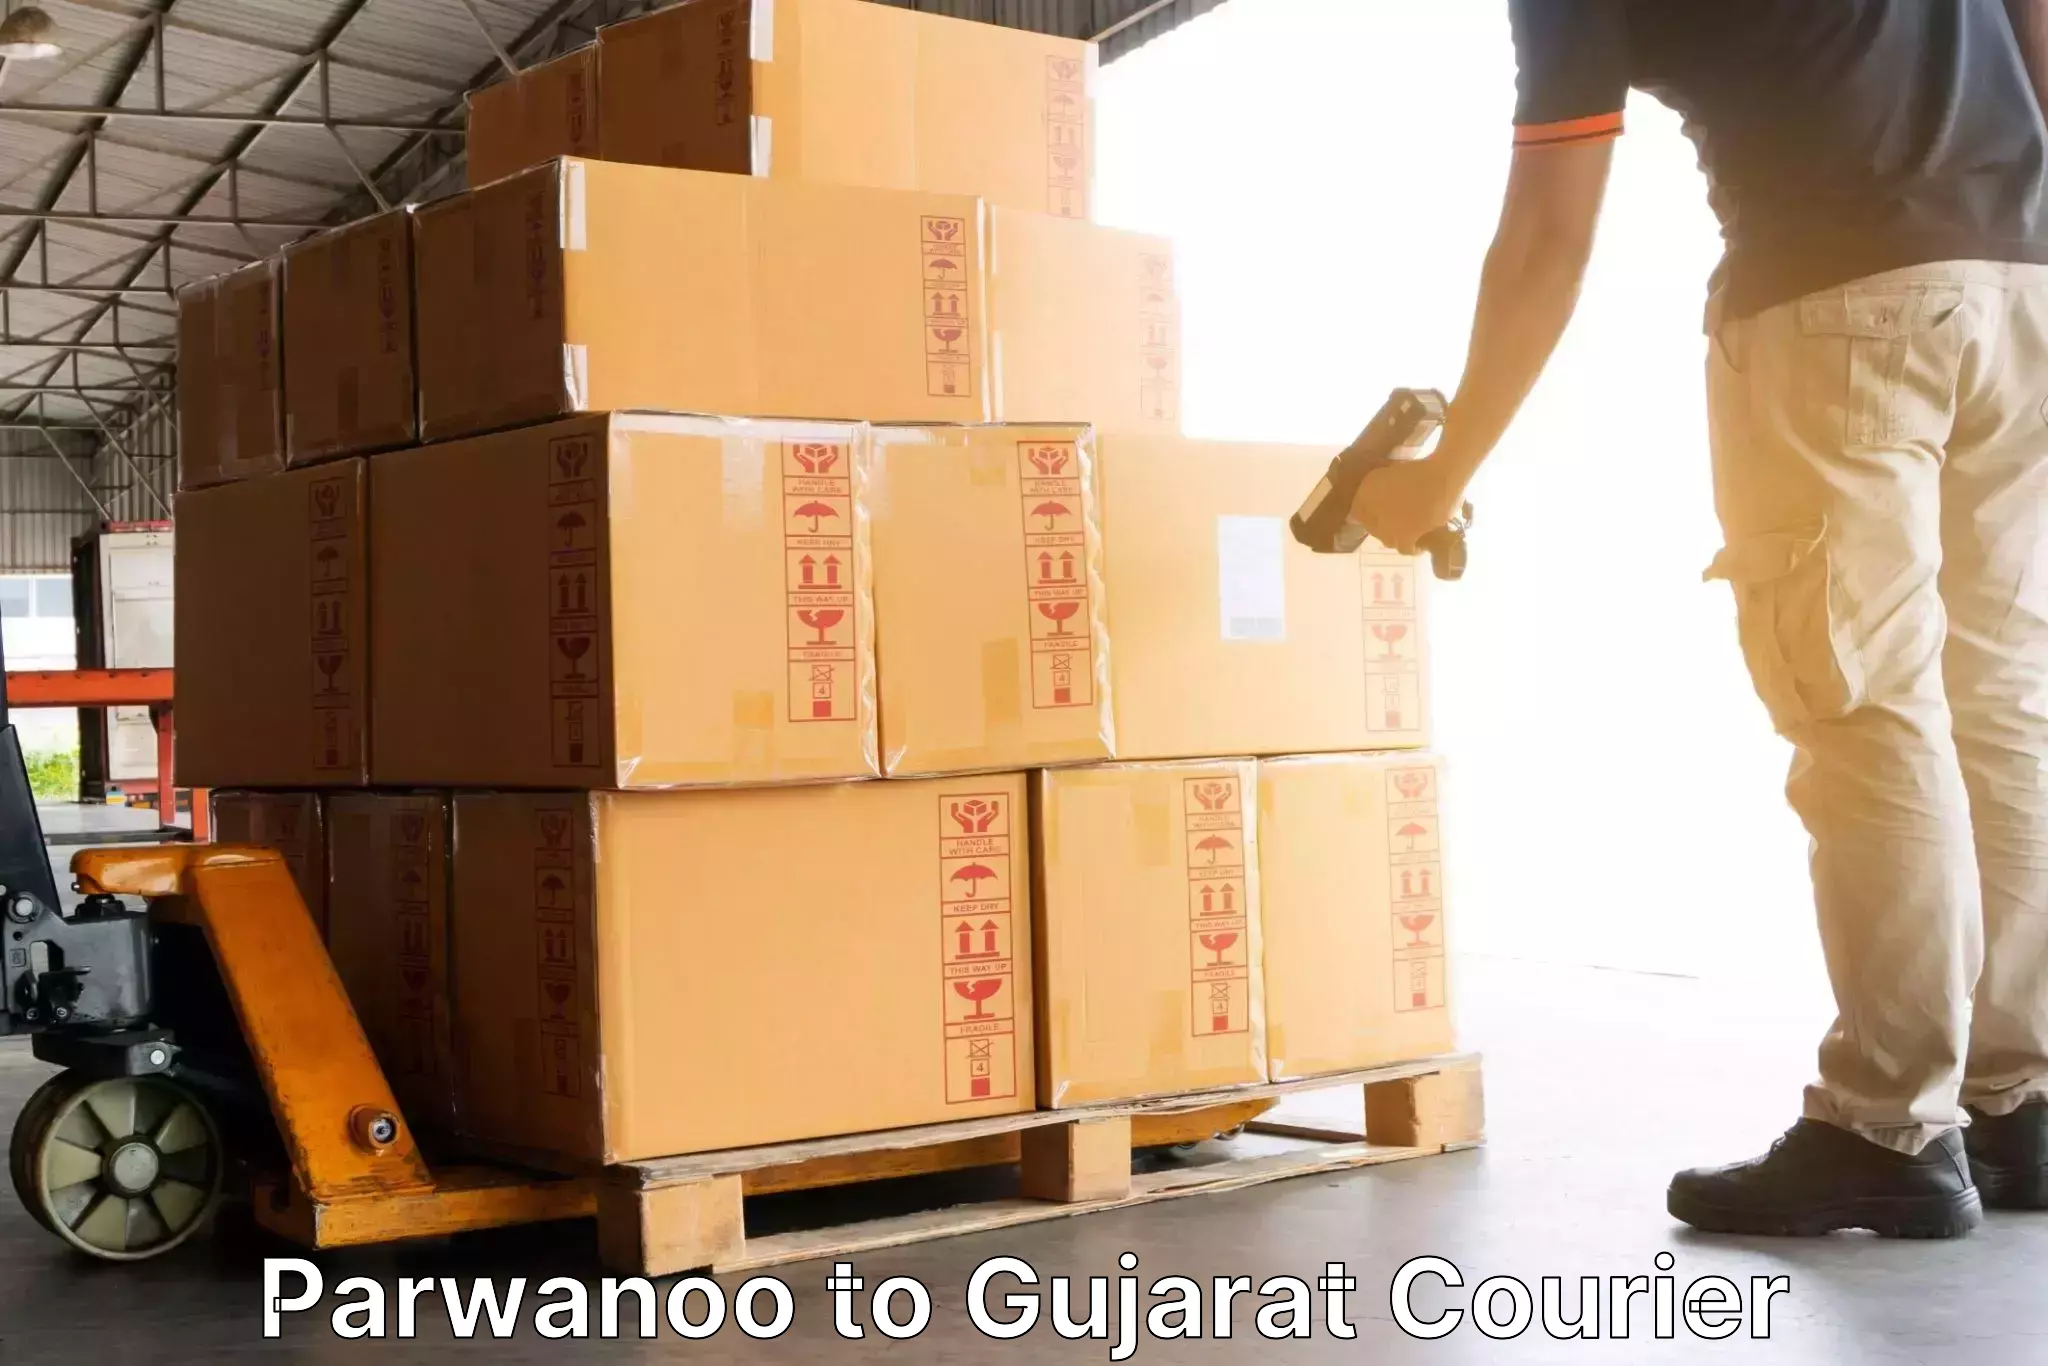 Automated shipping processes Parwanoo to Gujarat